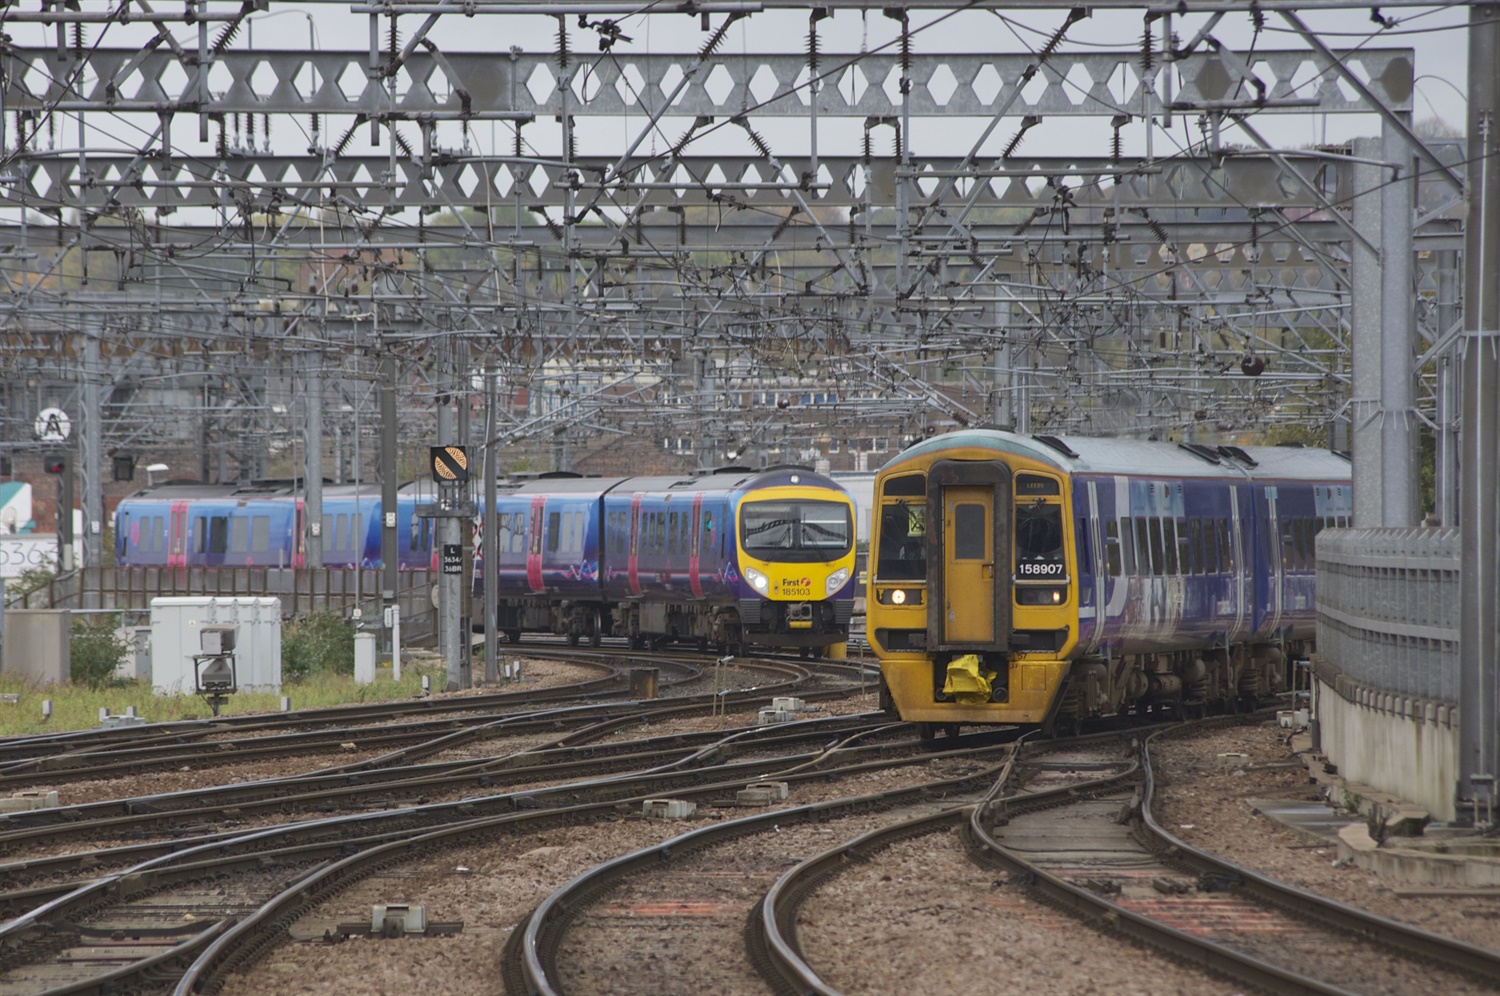 Transport Committee inquiry seeks evidence on rail franchising